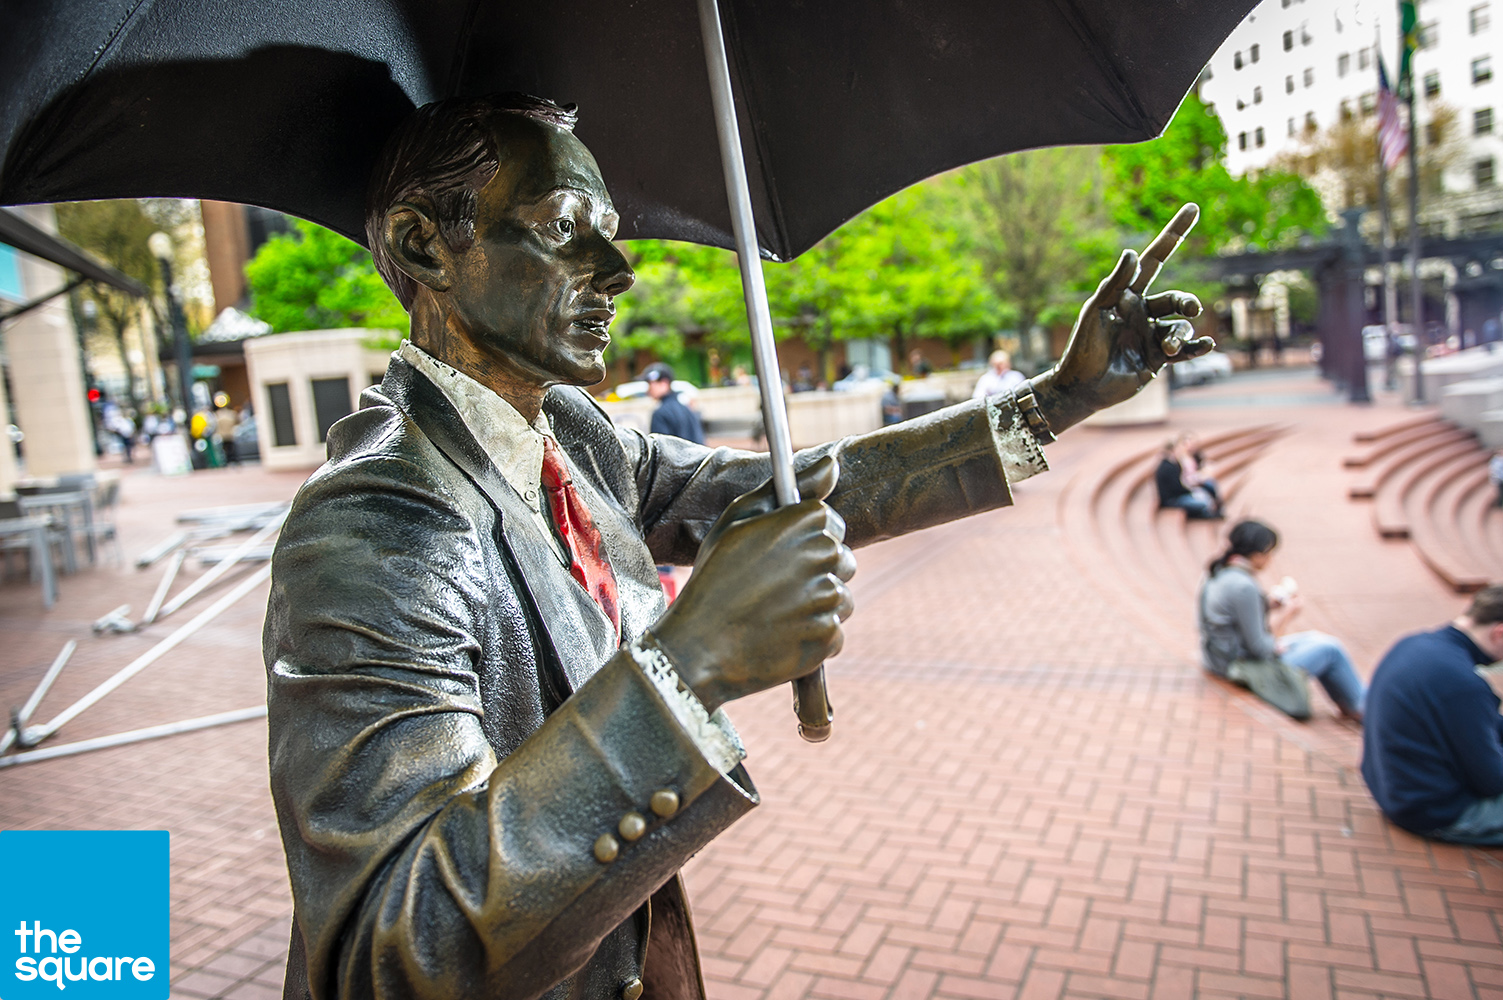 Allow Me - Serving as a signature Portland icon, this bronze life-sized sculpture of a man offering his umbrella, was created by nationally known artist J. Seward Johnson of Princeton, New Jersey. The sculpture joins a number of Johnson's works in public spaces in cities such as New York, Kansas City, Los Angeles and Oakland, California.